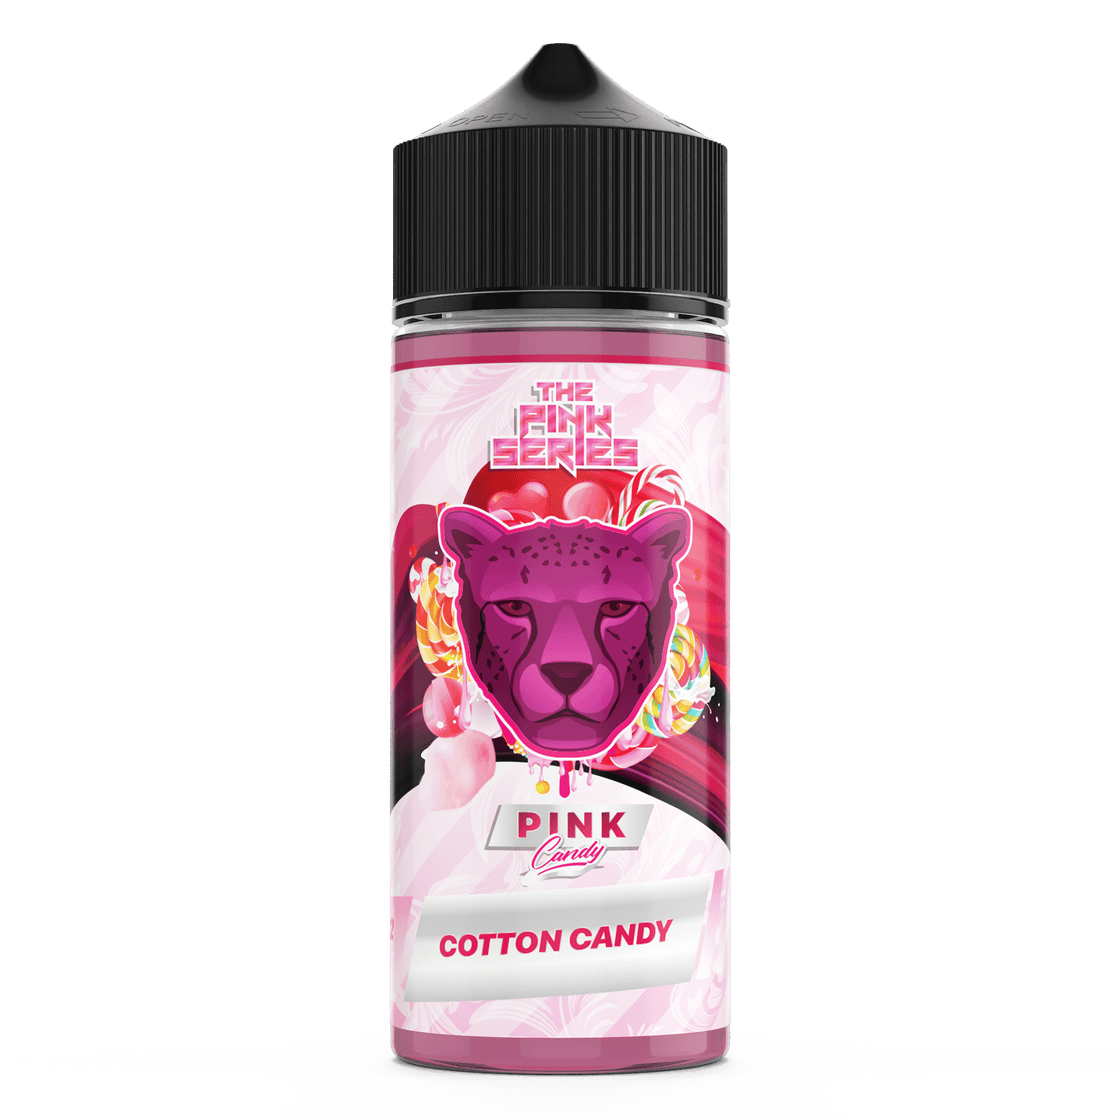 PINK CANDY - THE PINK SERIES 100ML SHORT FILL E-LIQUID BY DR.VAPES - Vapeslough